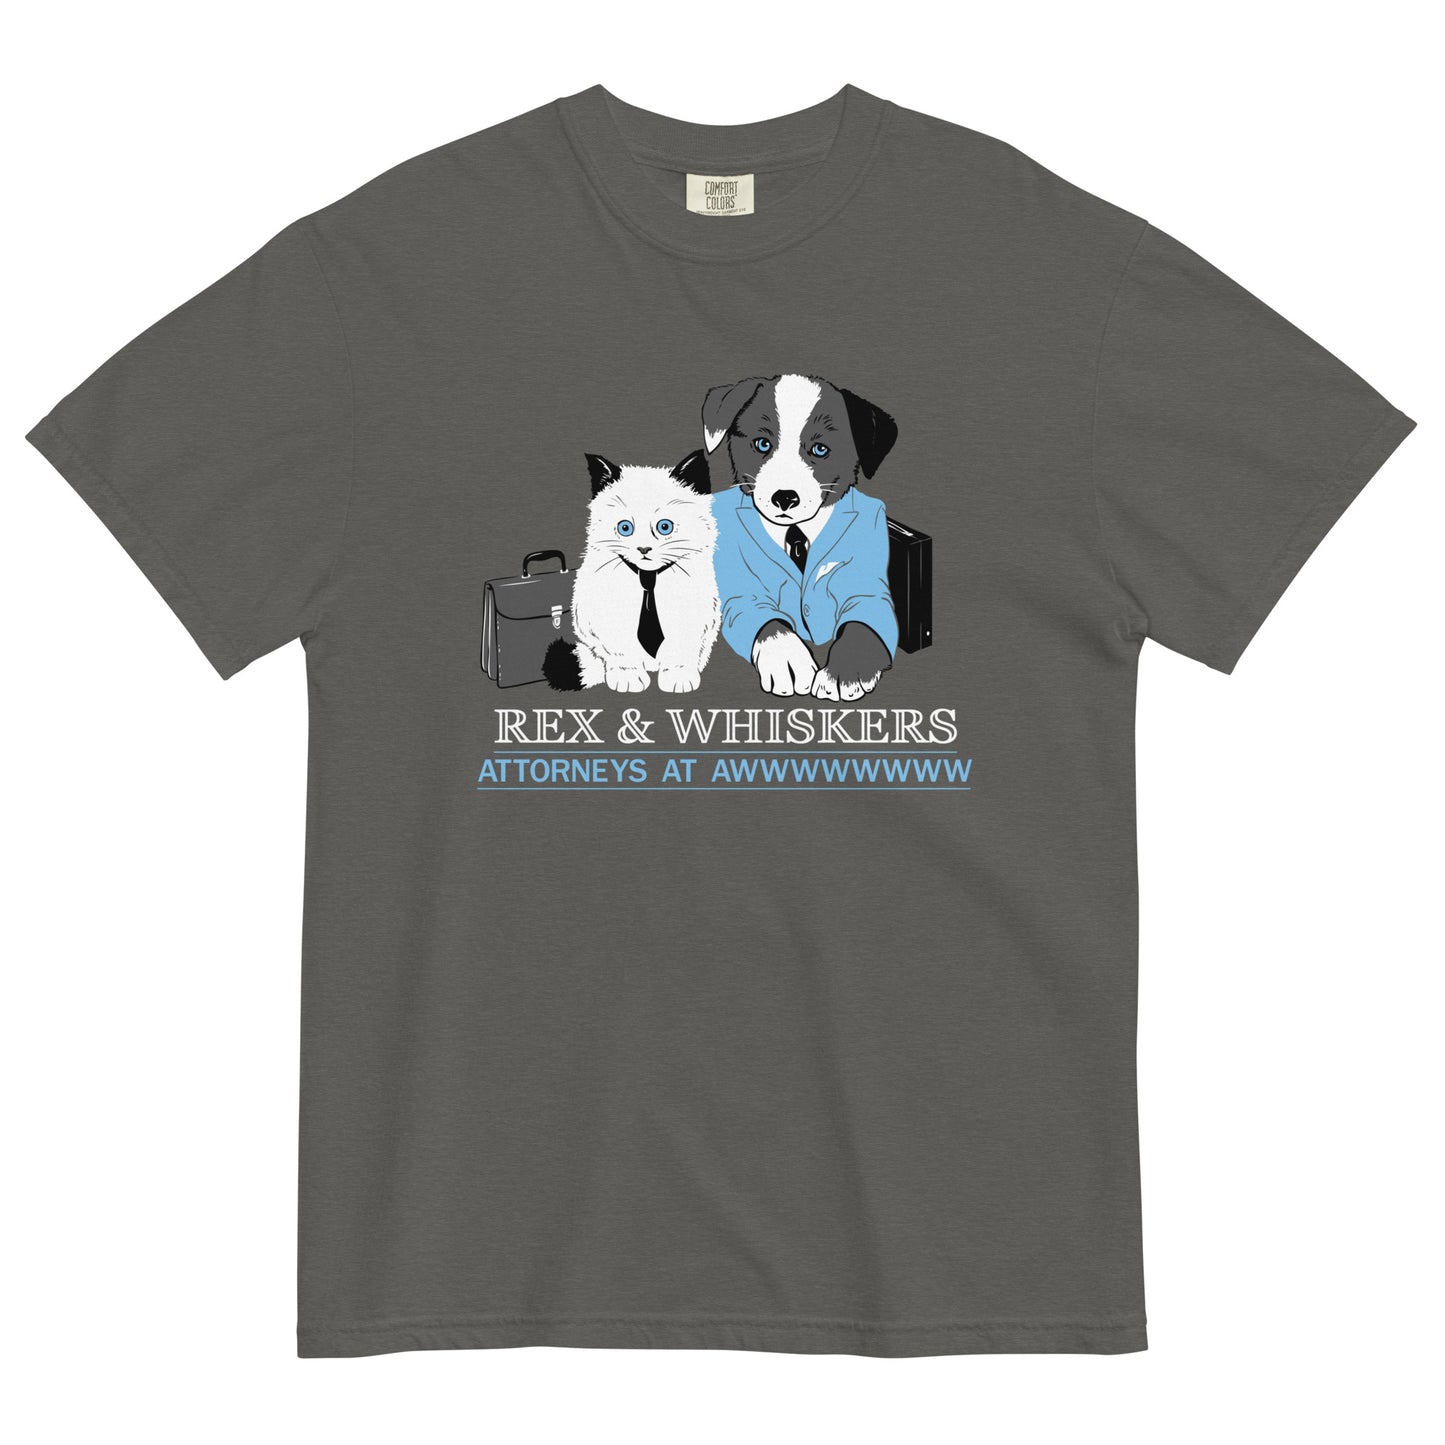 Rex and Whiskers Attorneys Men's Relaxed Fit Tee